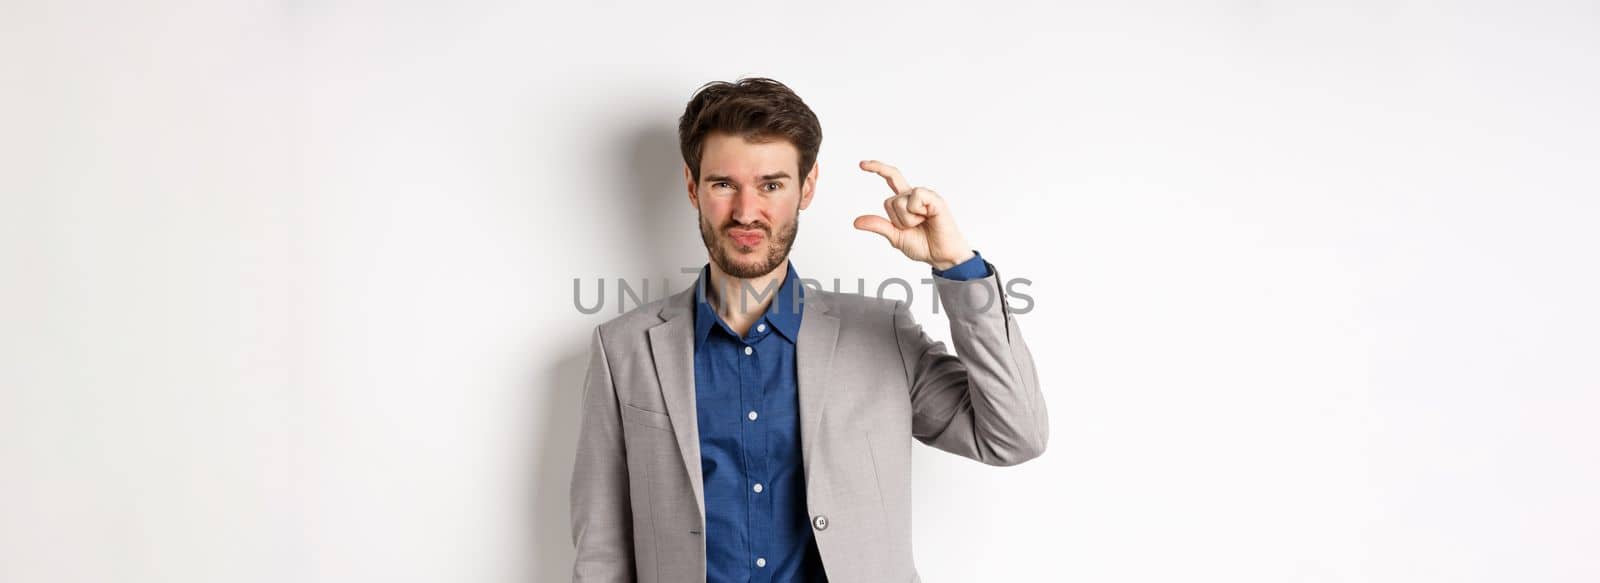 Disappointed businessman showing small size and grimacing upset, little income, standing displeased against white background.